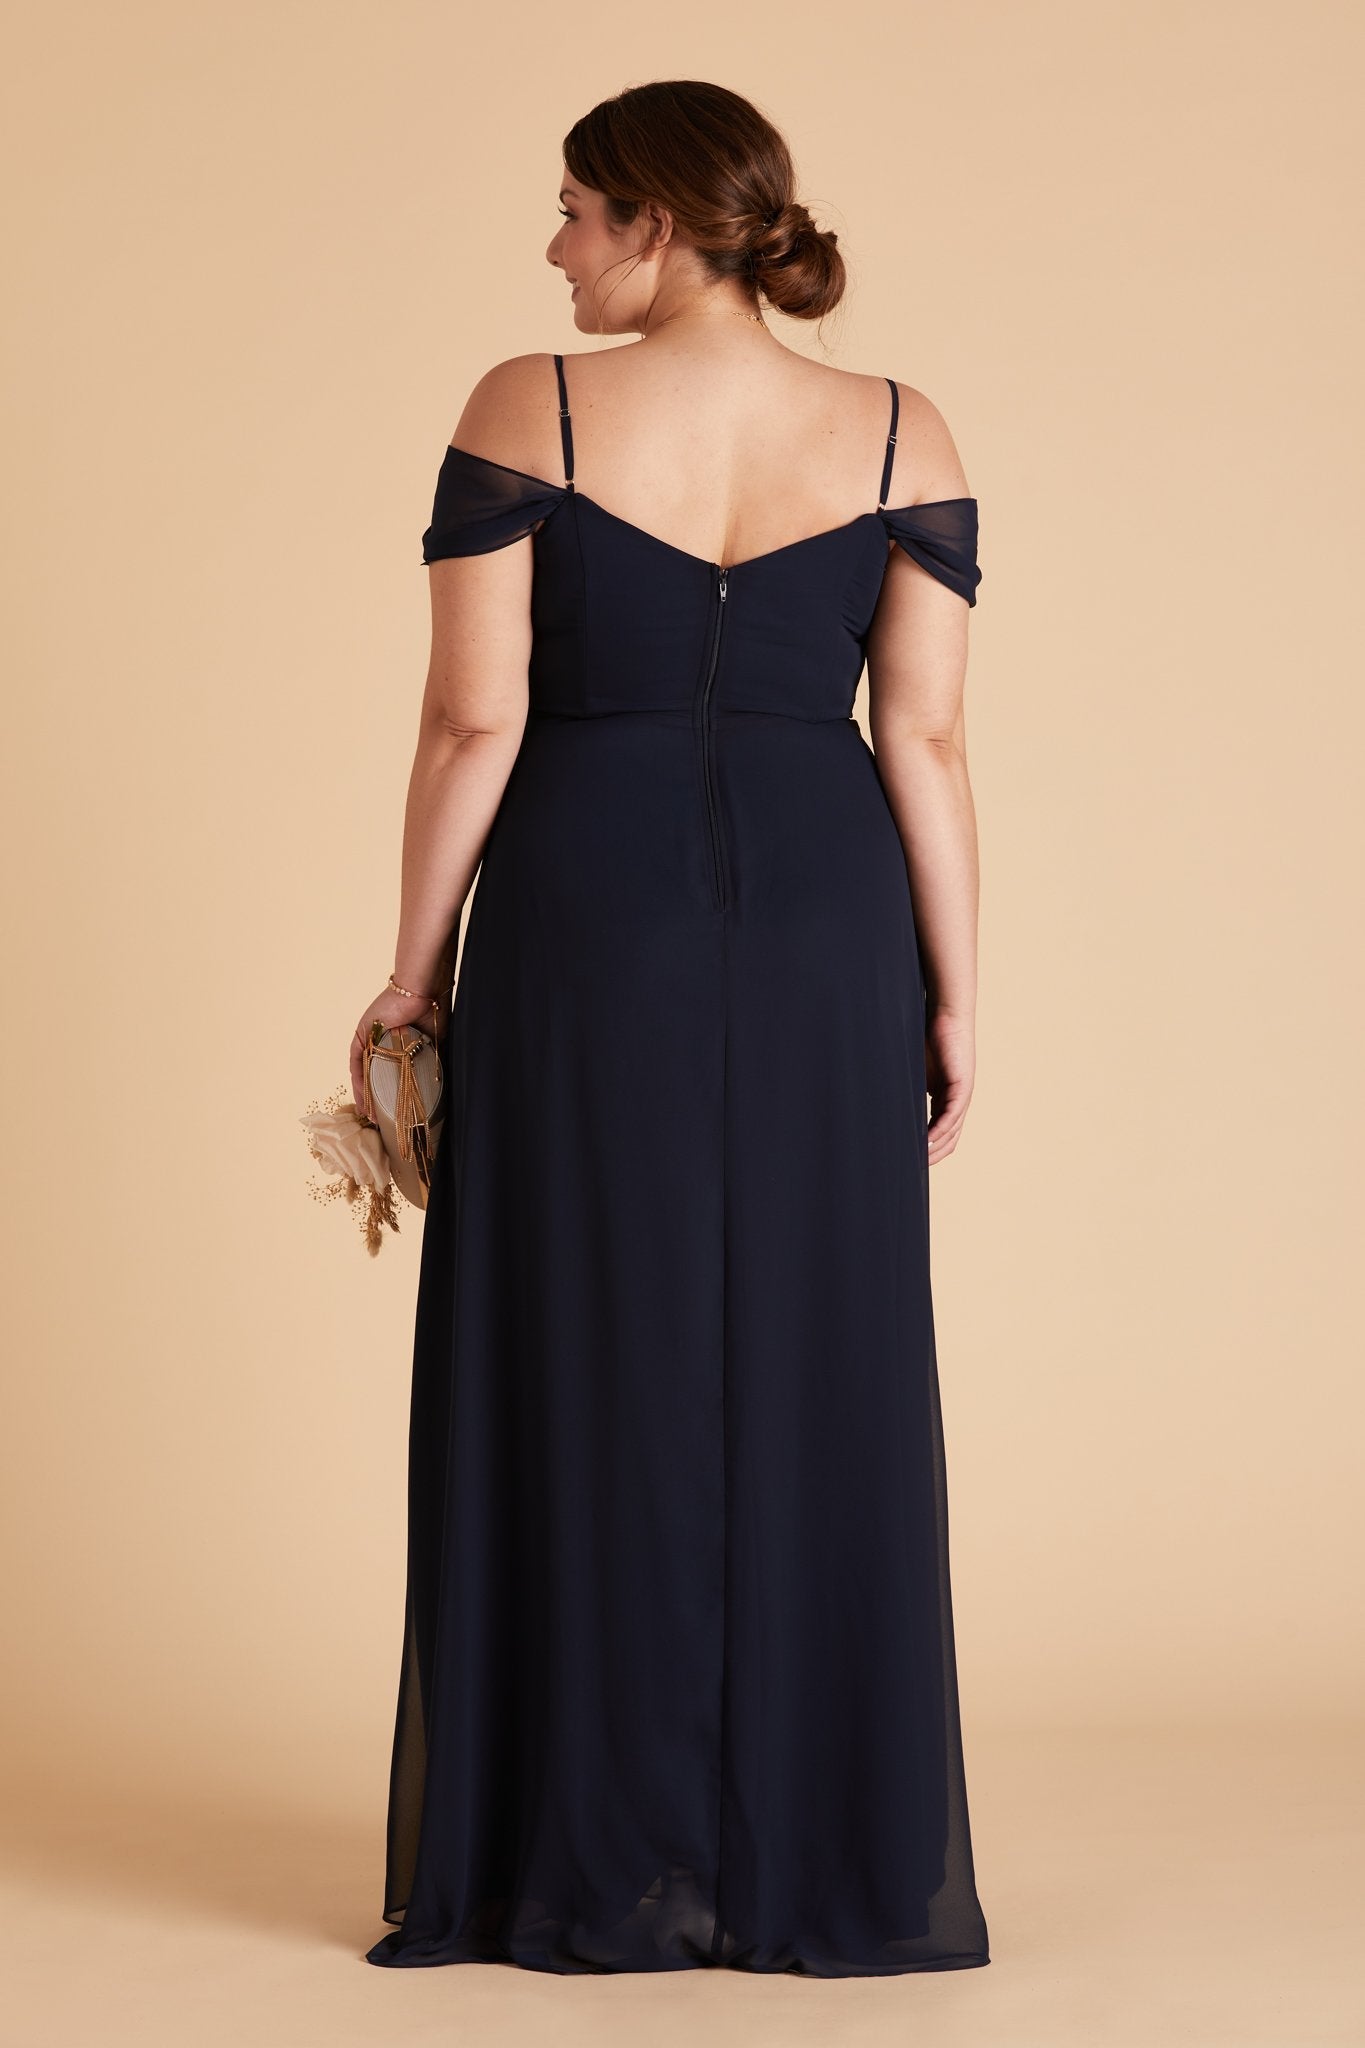 Spence convertible plus size bridesmaid dress in navy blue chiffon by Birdy Grey, back view